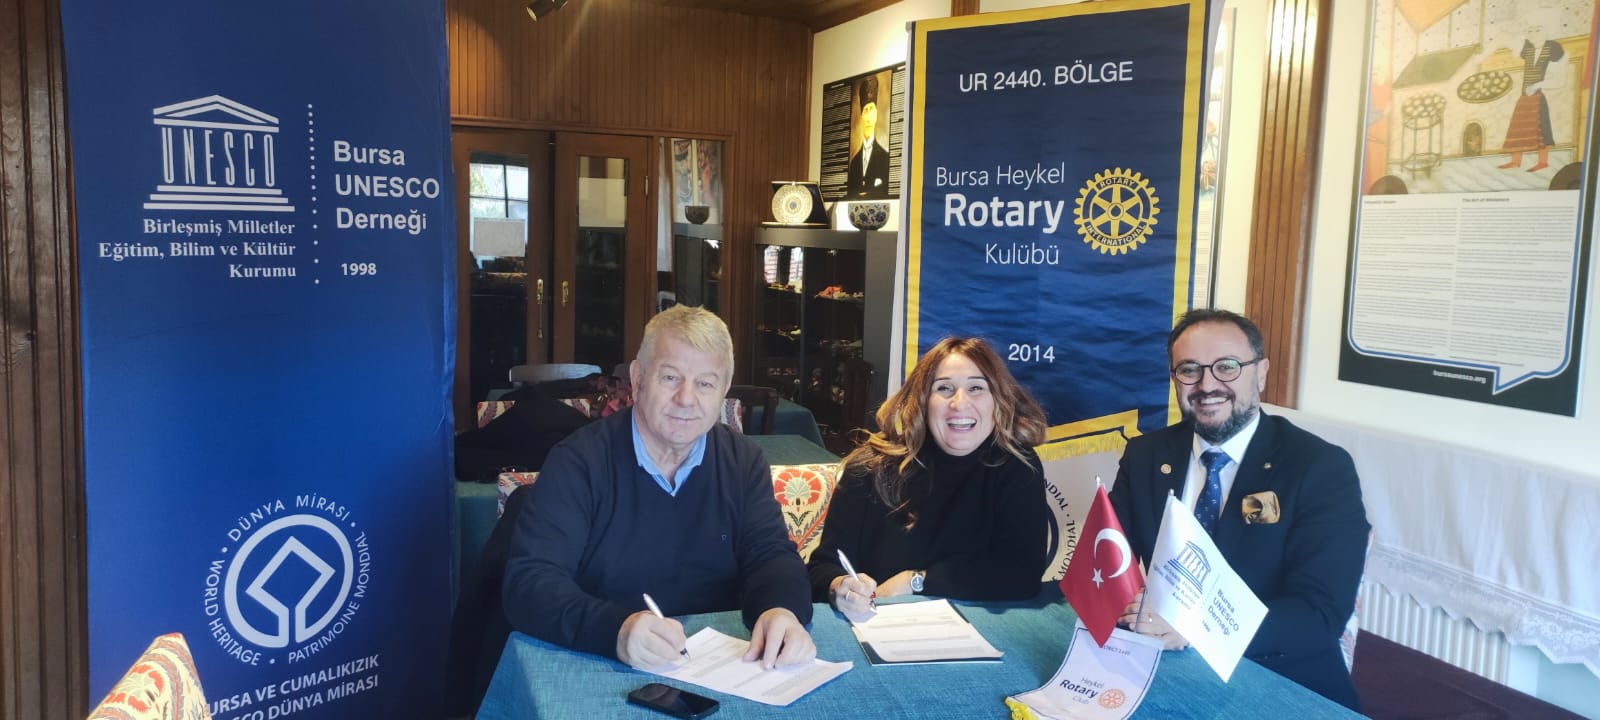 District 2440 Heykel Rotary Club and Bursa Unesco Association Established Strong Collaboration